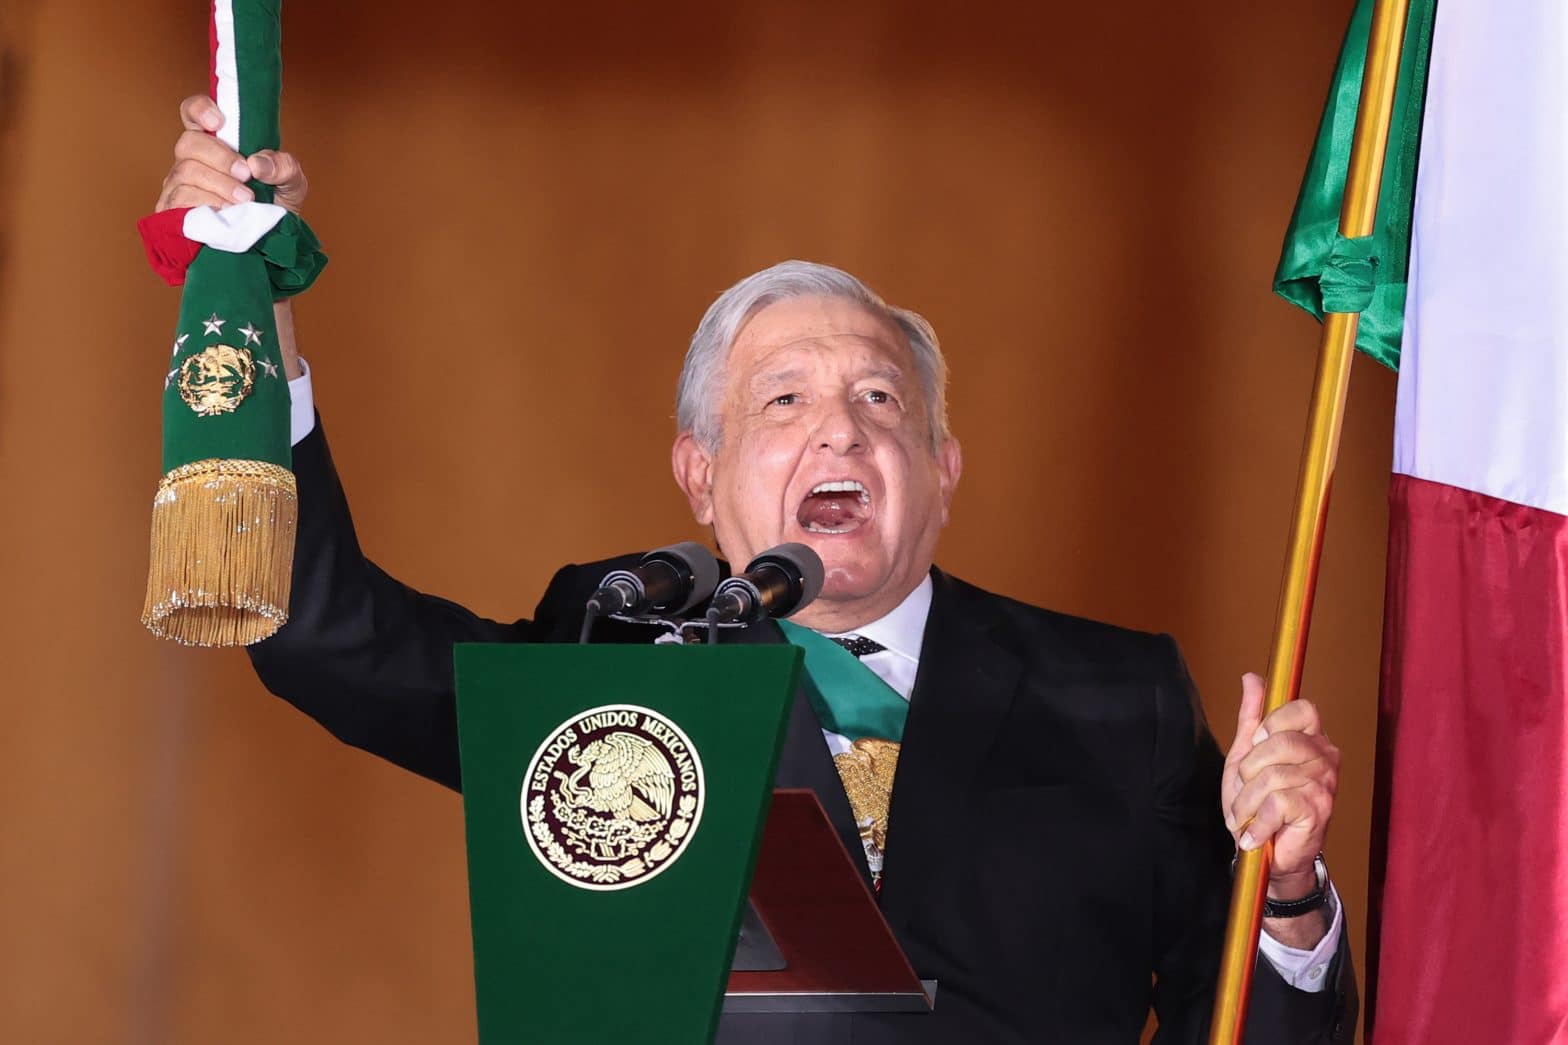 Champion of Poor or Demagogue? Mexico’s President Remains Popular Despite Stalled Economy, Pandemic and Crime